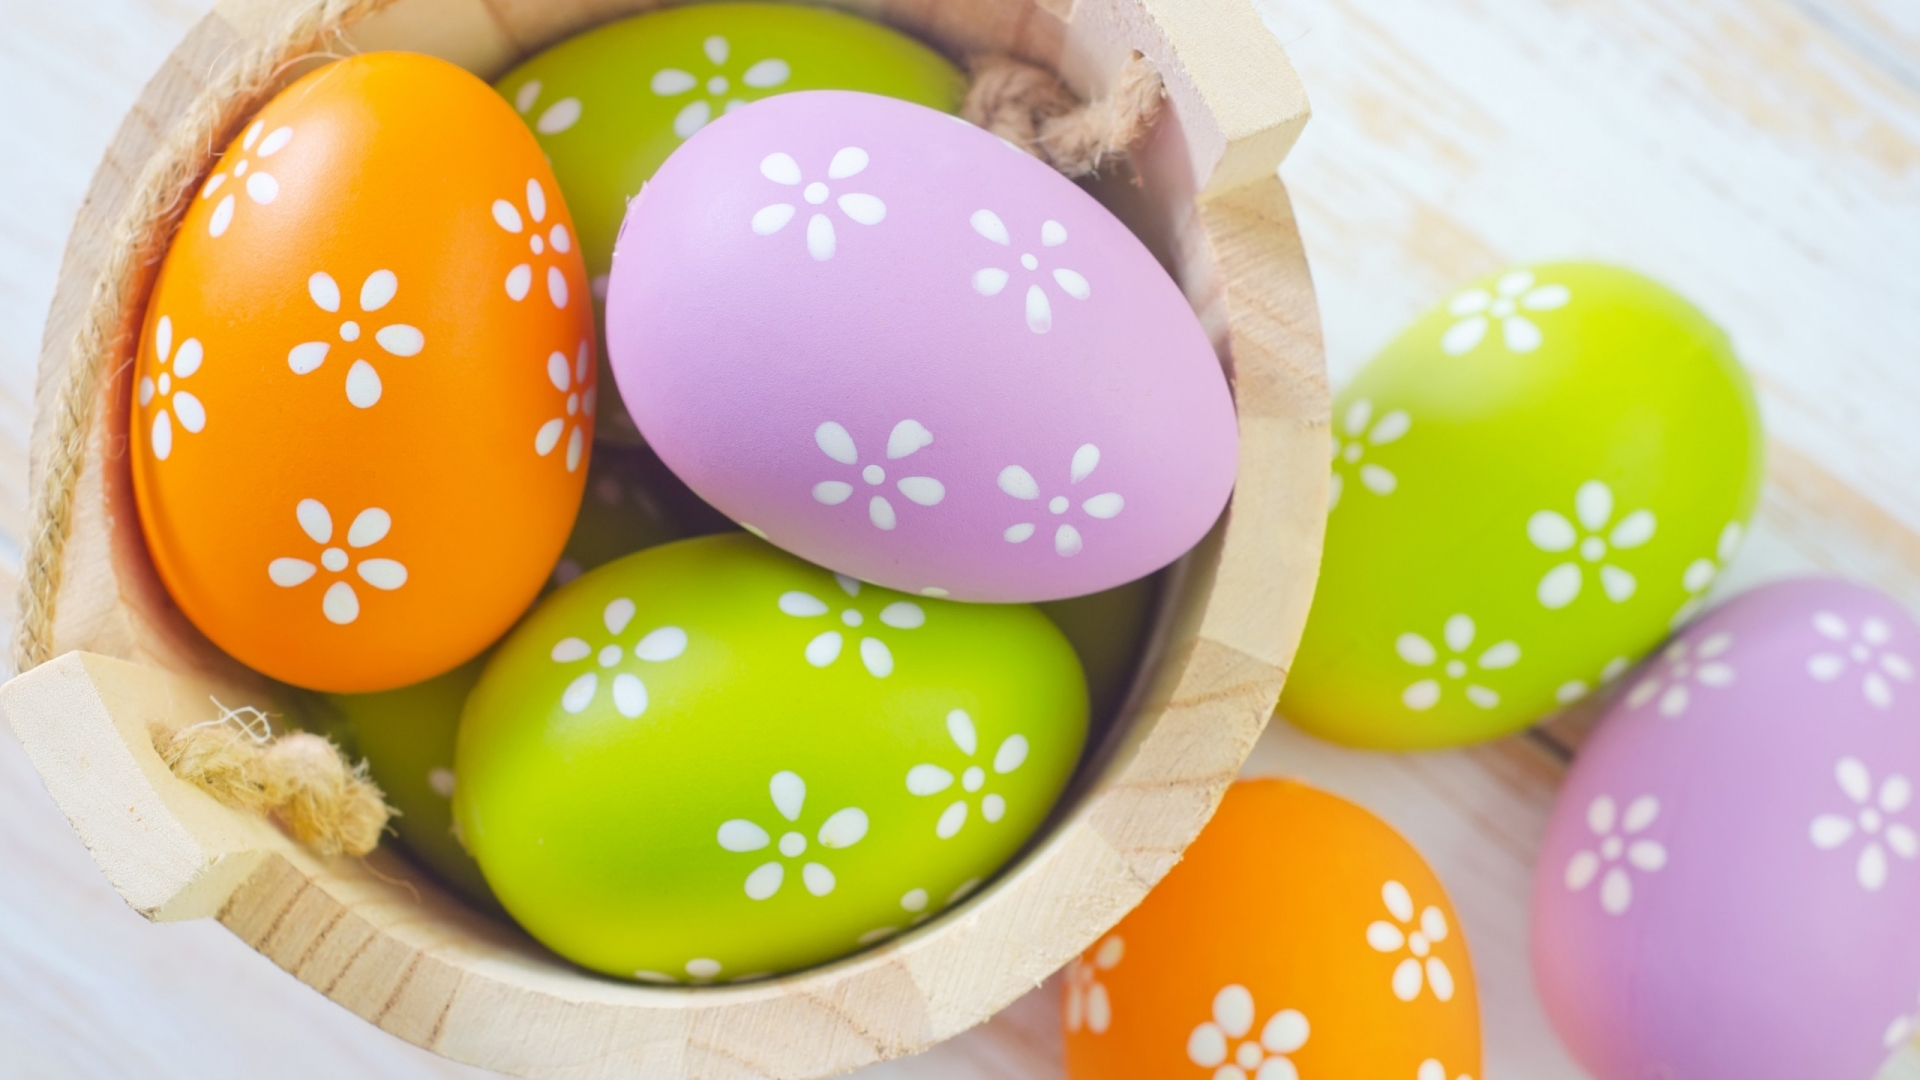 Beautiful 2014 Easter Eggs for 1920 x 1080 HDTV 1080p resolution